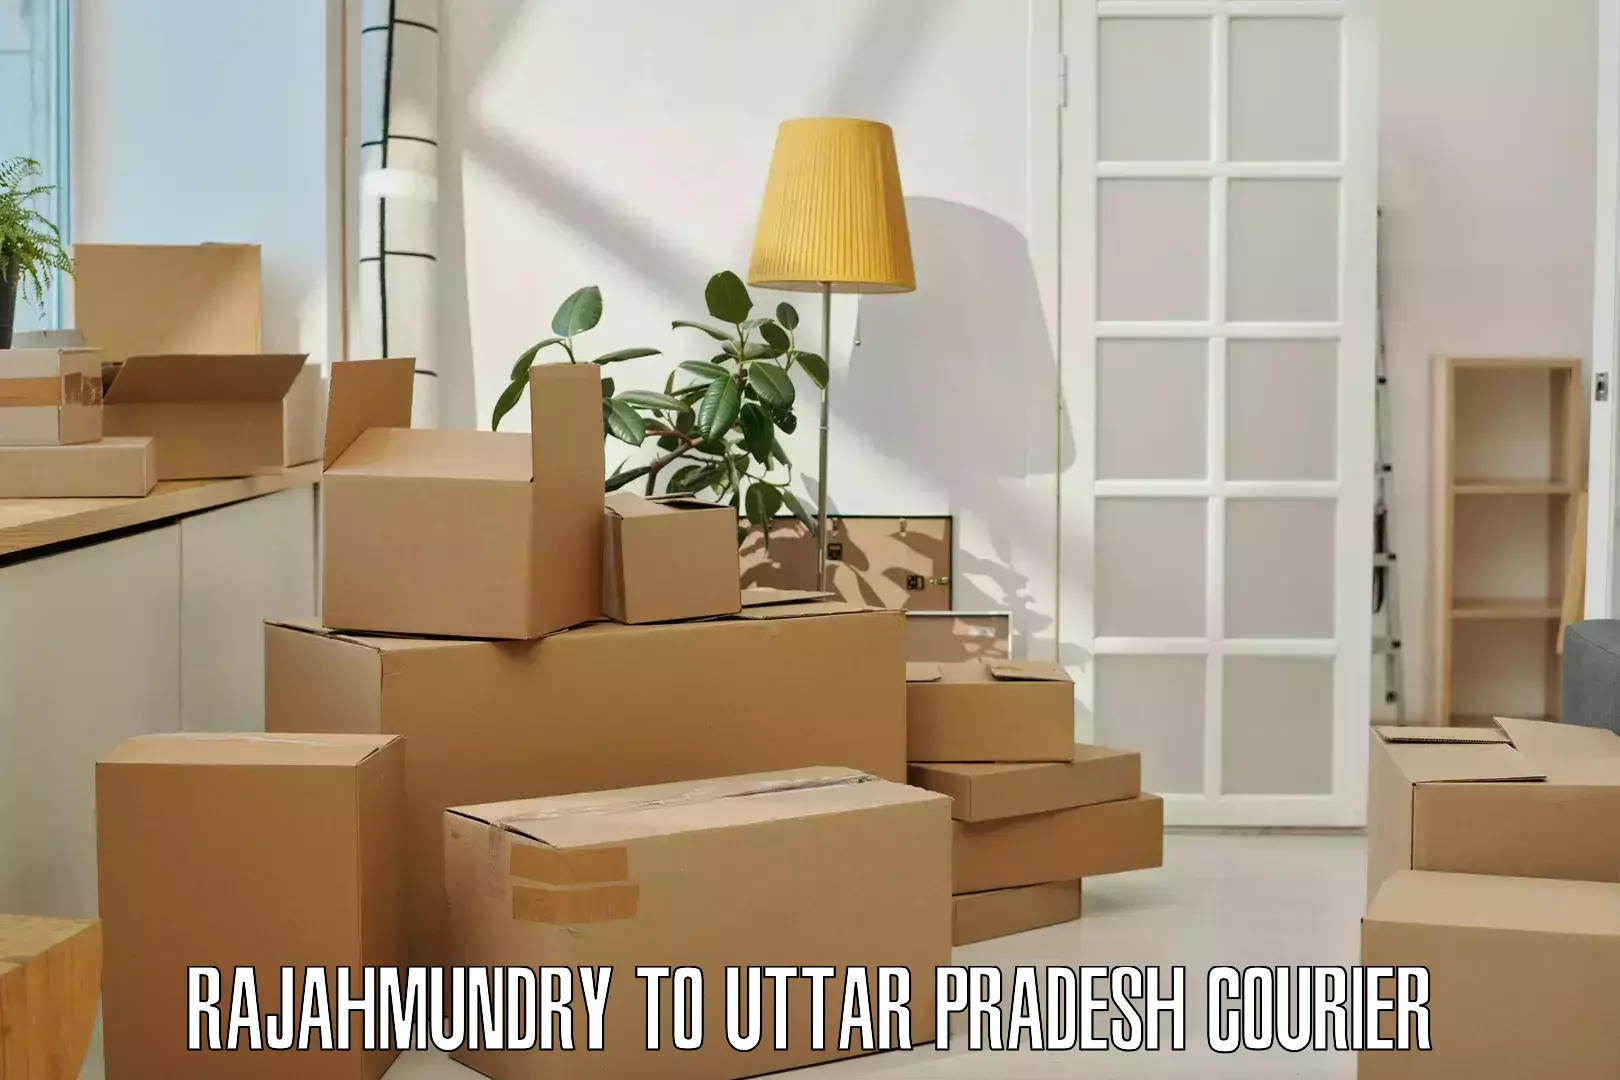 Sustainable courier practices Rajahmundry to Amethi